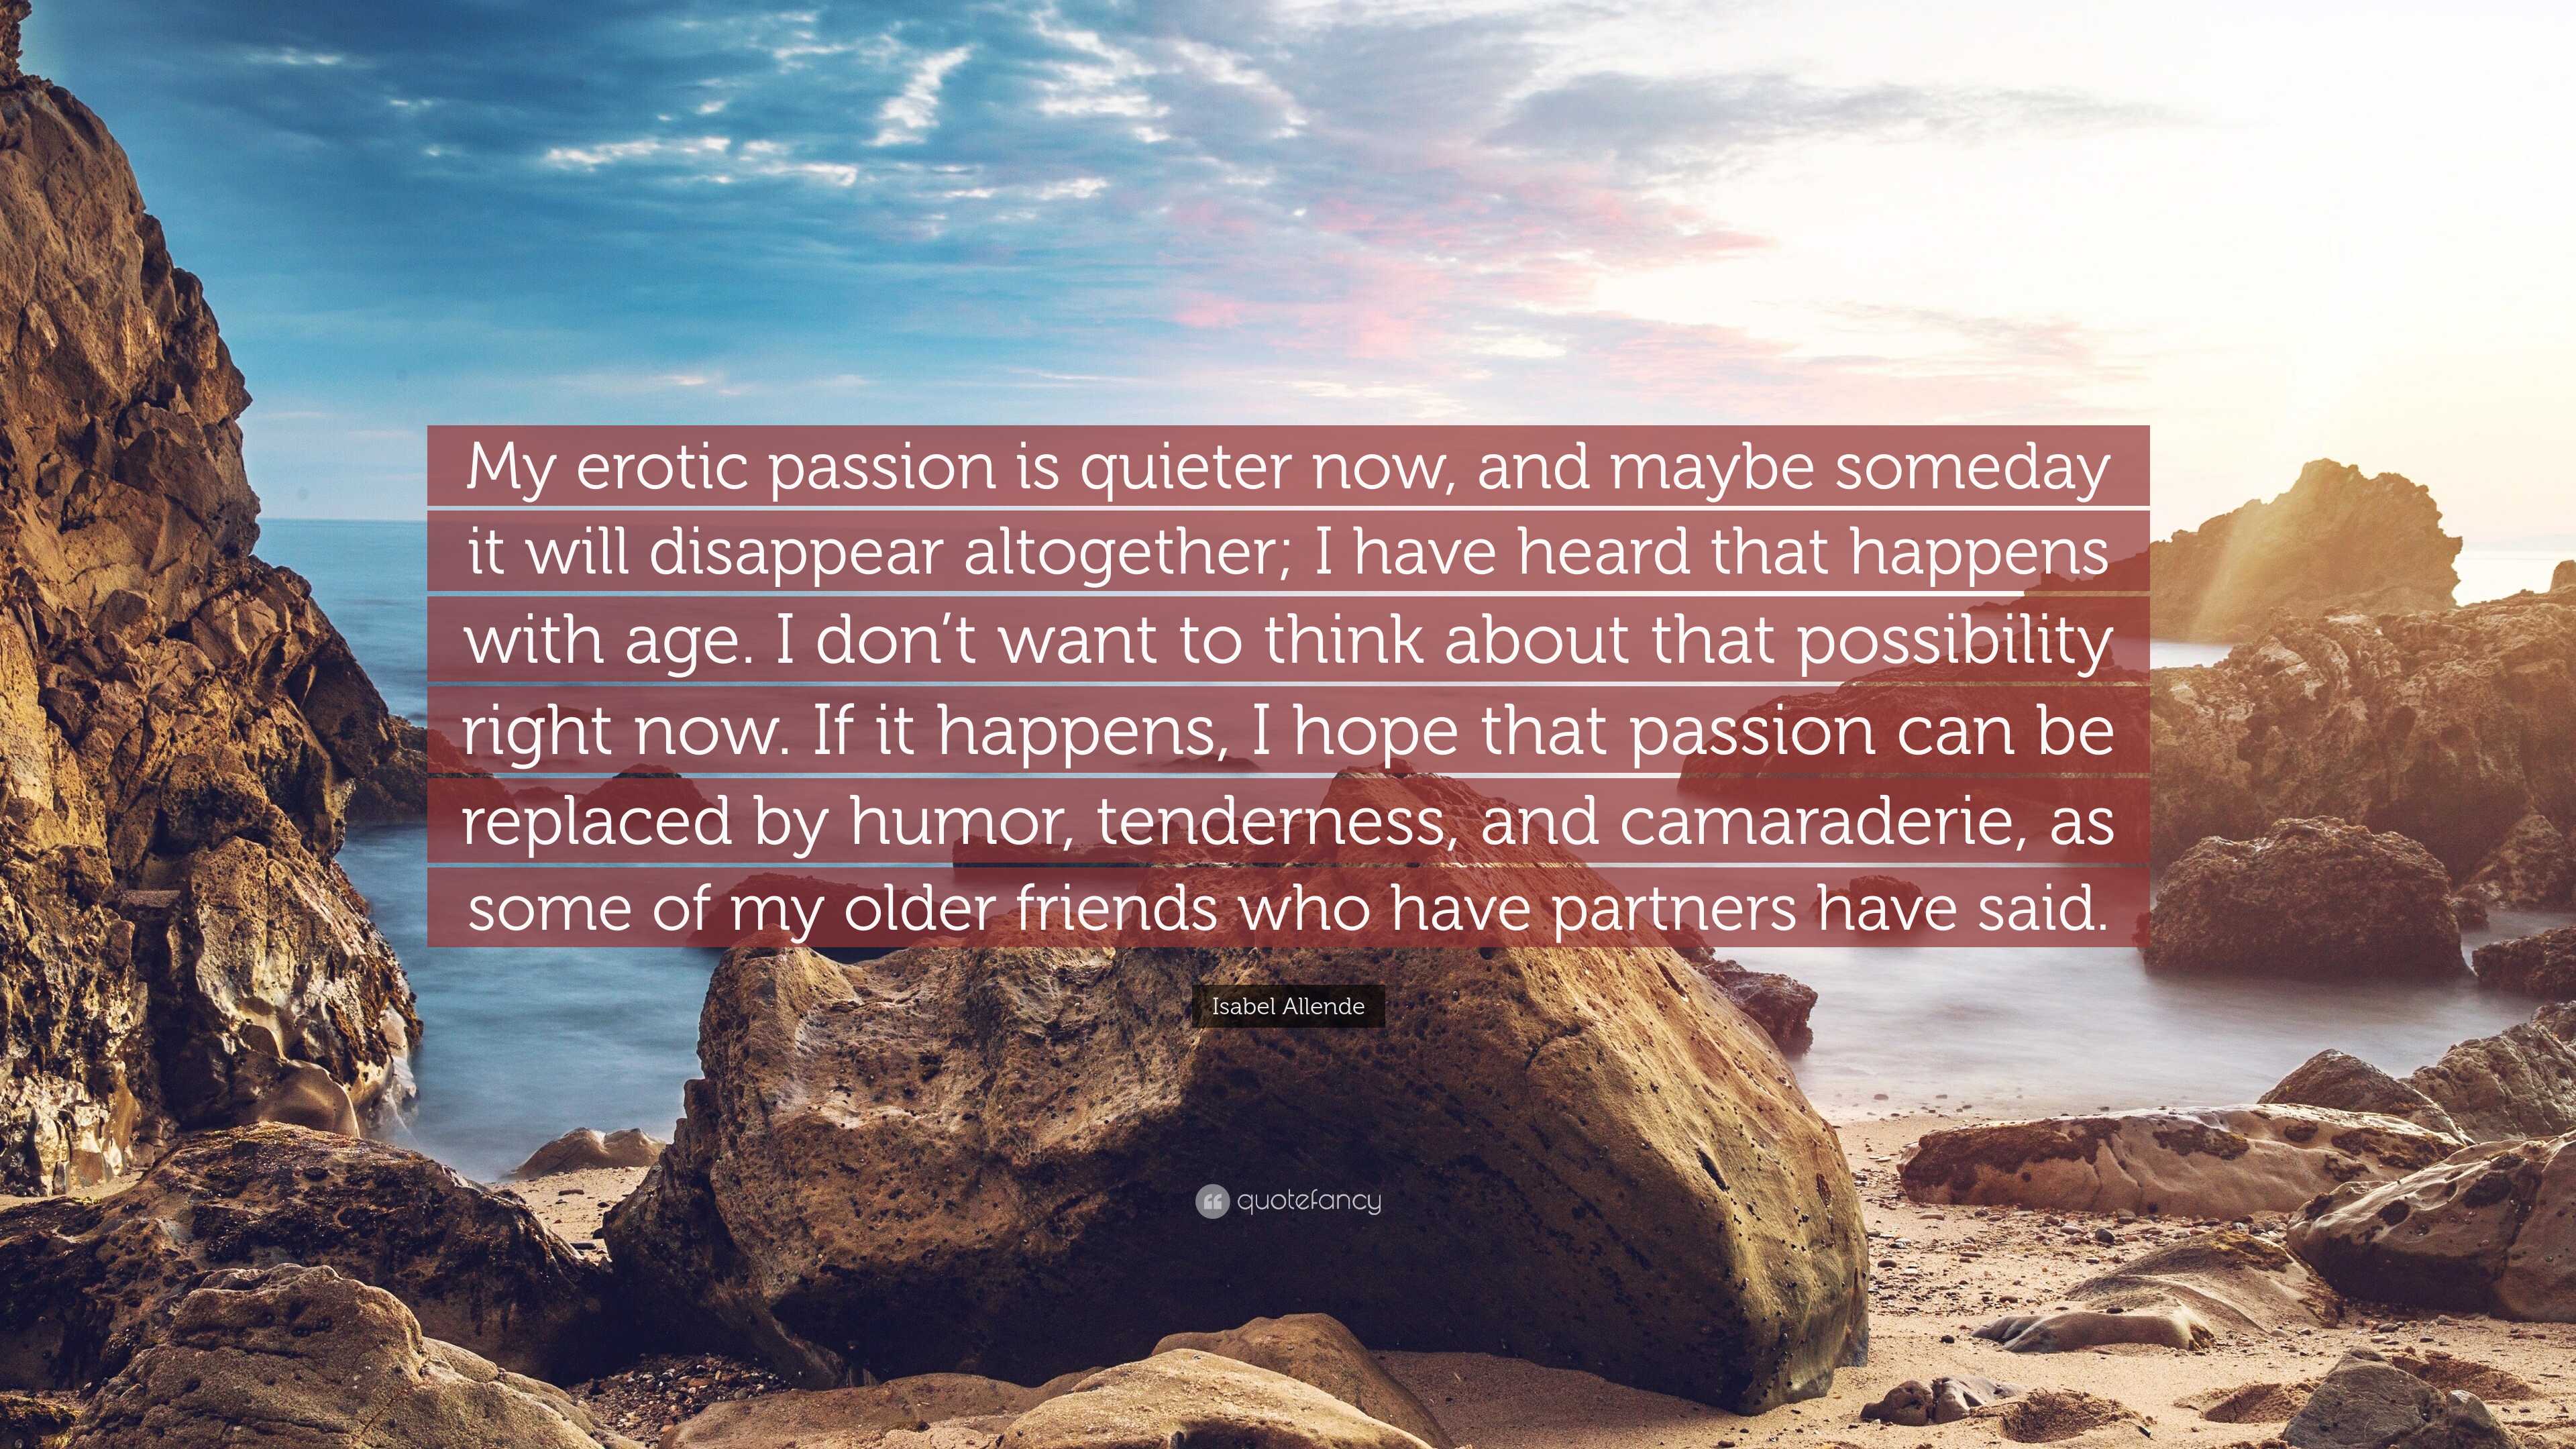 https://quotefancy.com/media/wallpaper/3840x2160/8086667-Isabel-Allende-Quote-My-erotic-passion-is-quieter-now-and-maybe-someday-it-will.jpg